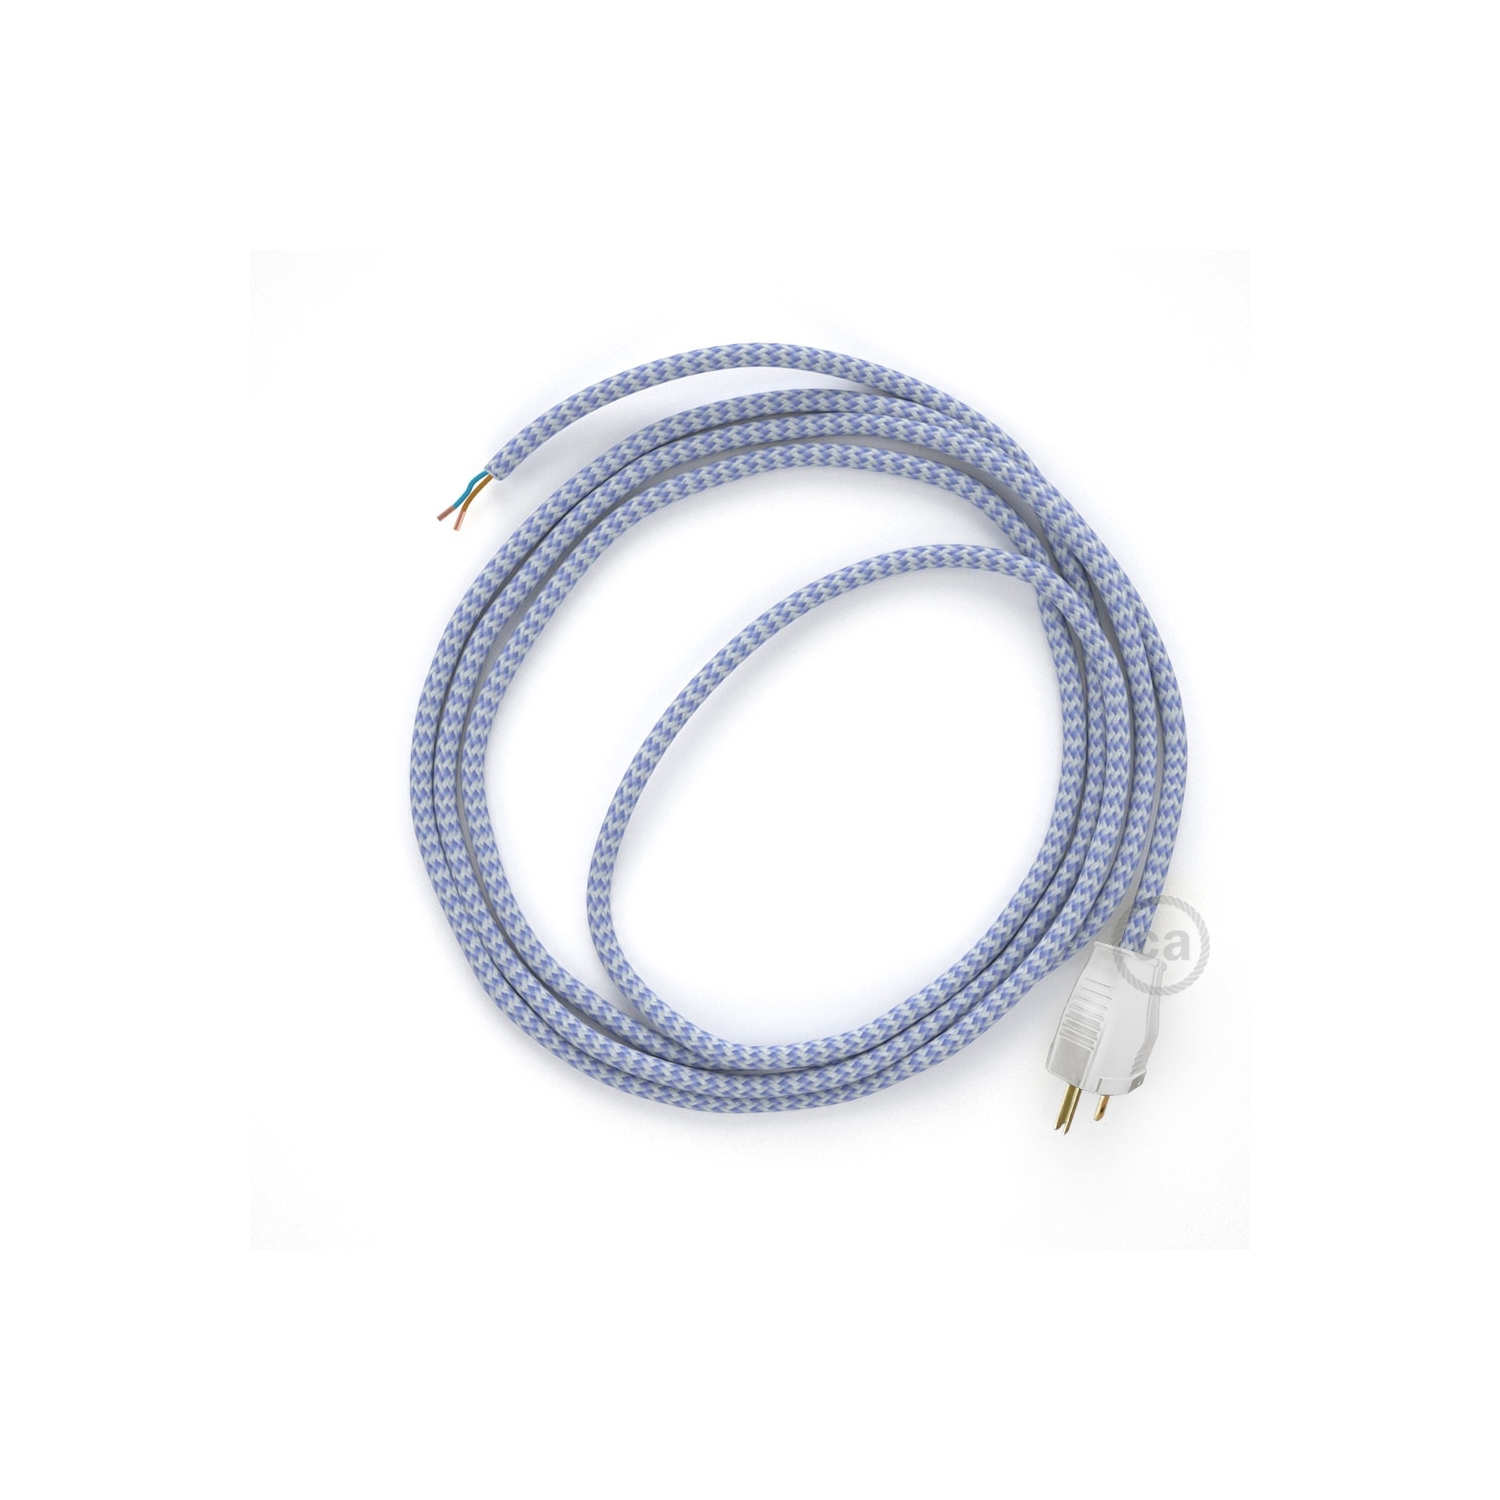 Cord-set - RZ07 Lilac & White Chevron Covered Round Cable